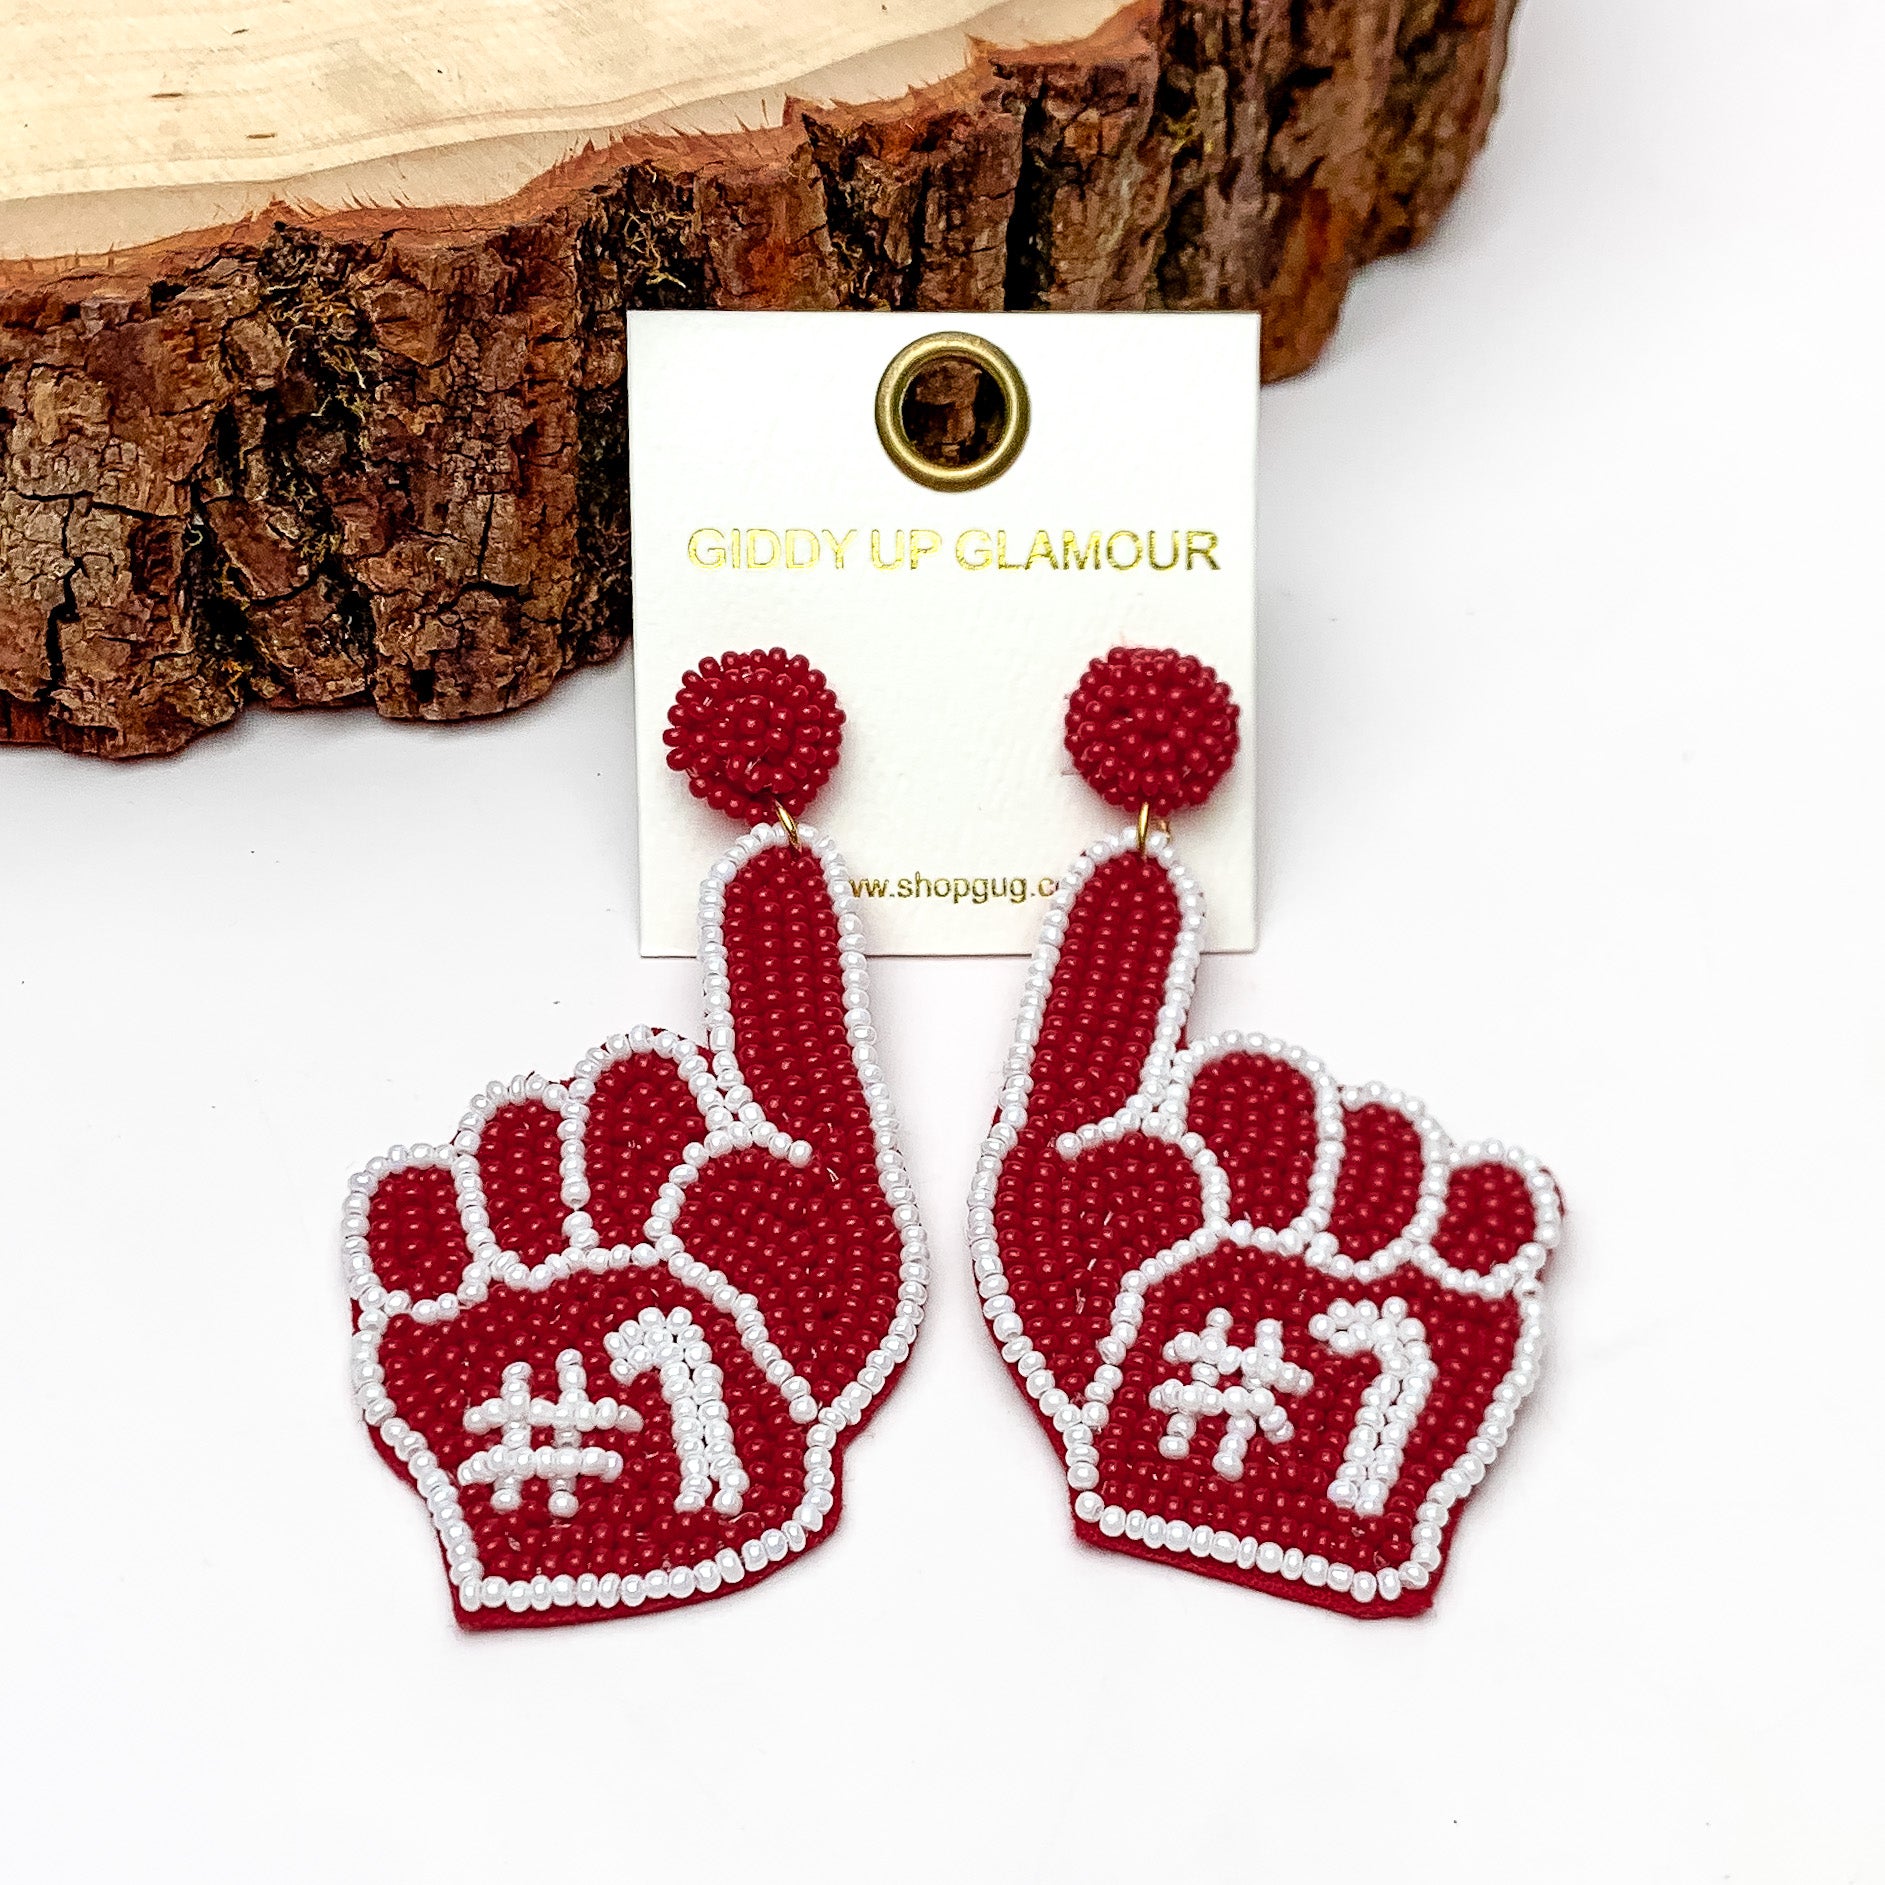 #1 Beaded Foam Finger Earrings in Maroon and White - Giddy Up Glamour Boutique